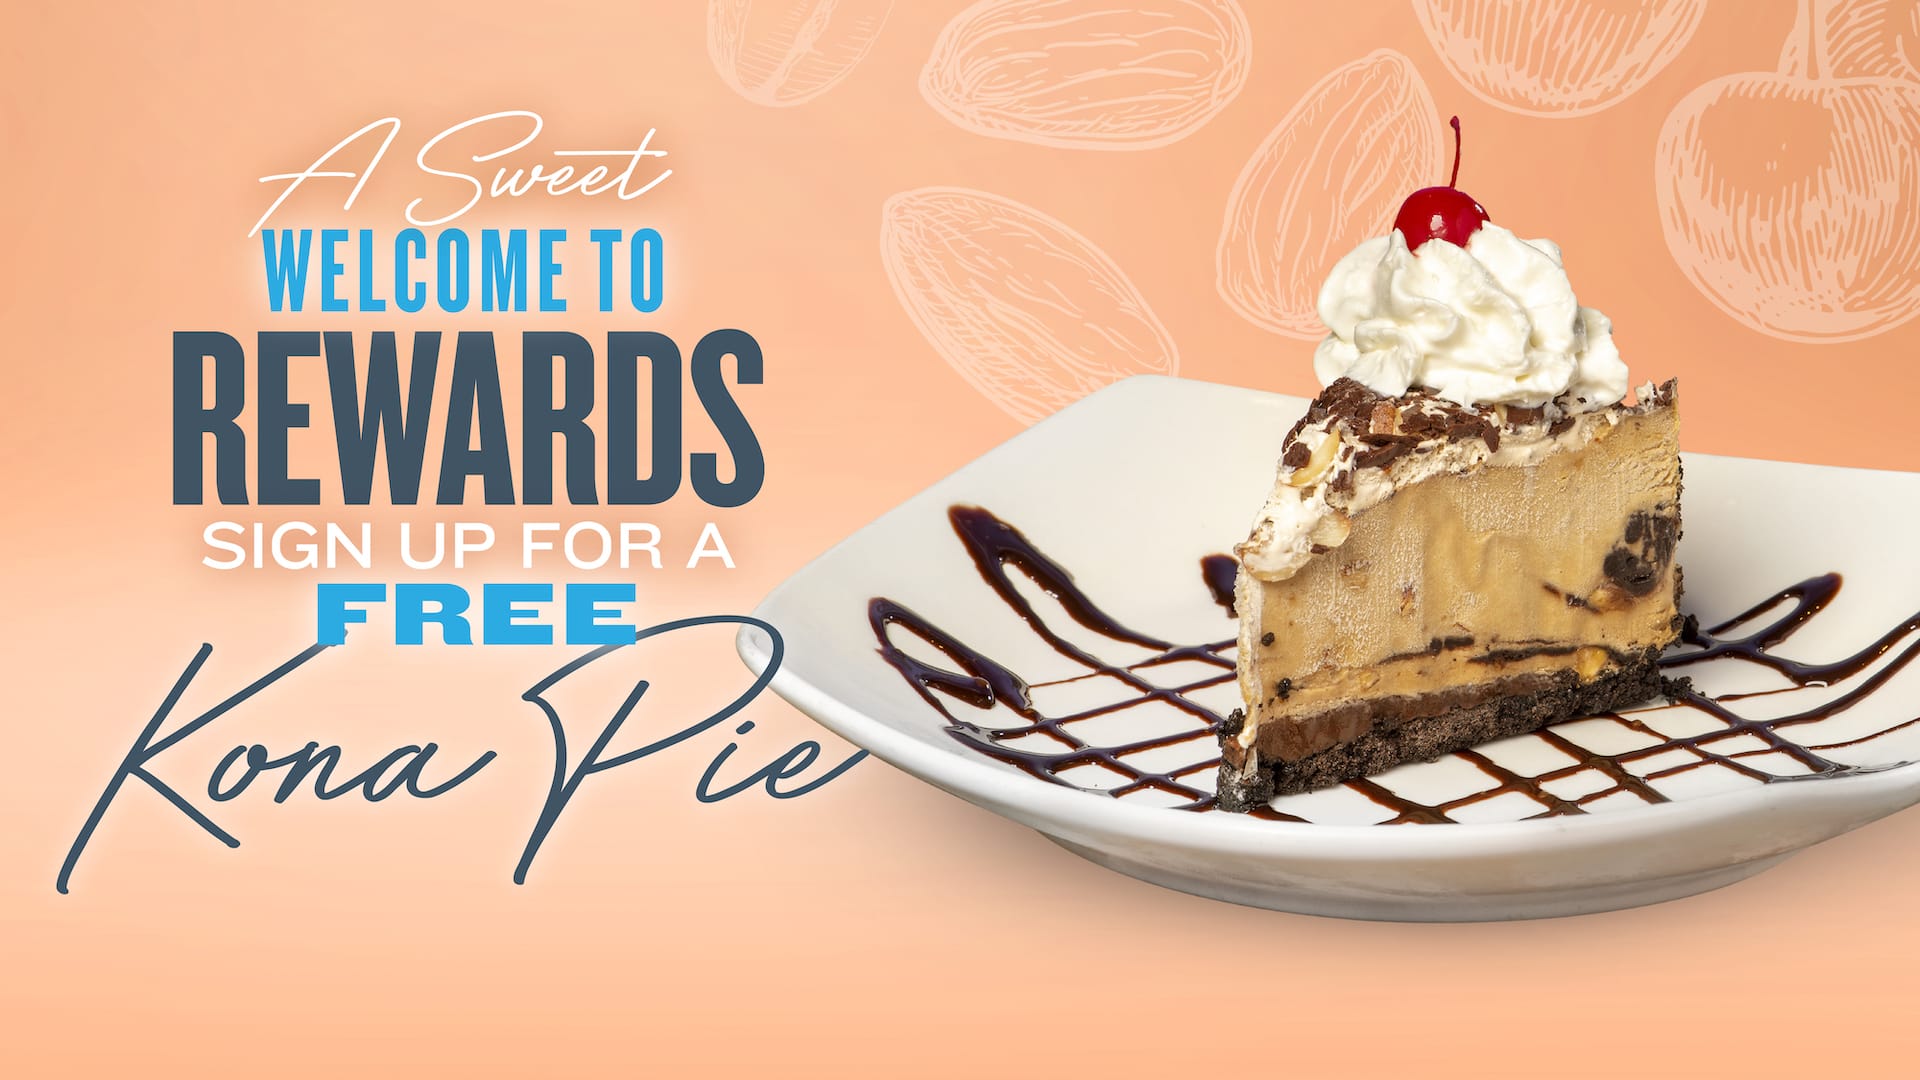 A sweet welcome to rewards sign up for free - Kona Pie